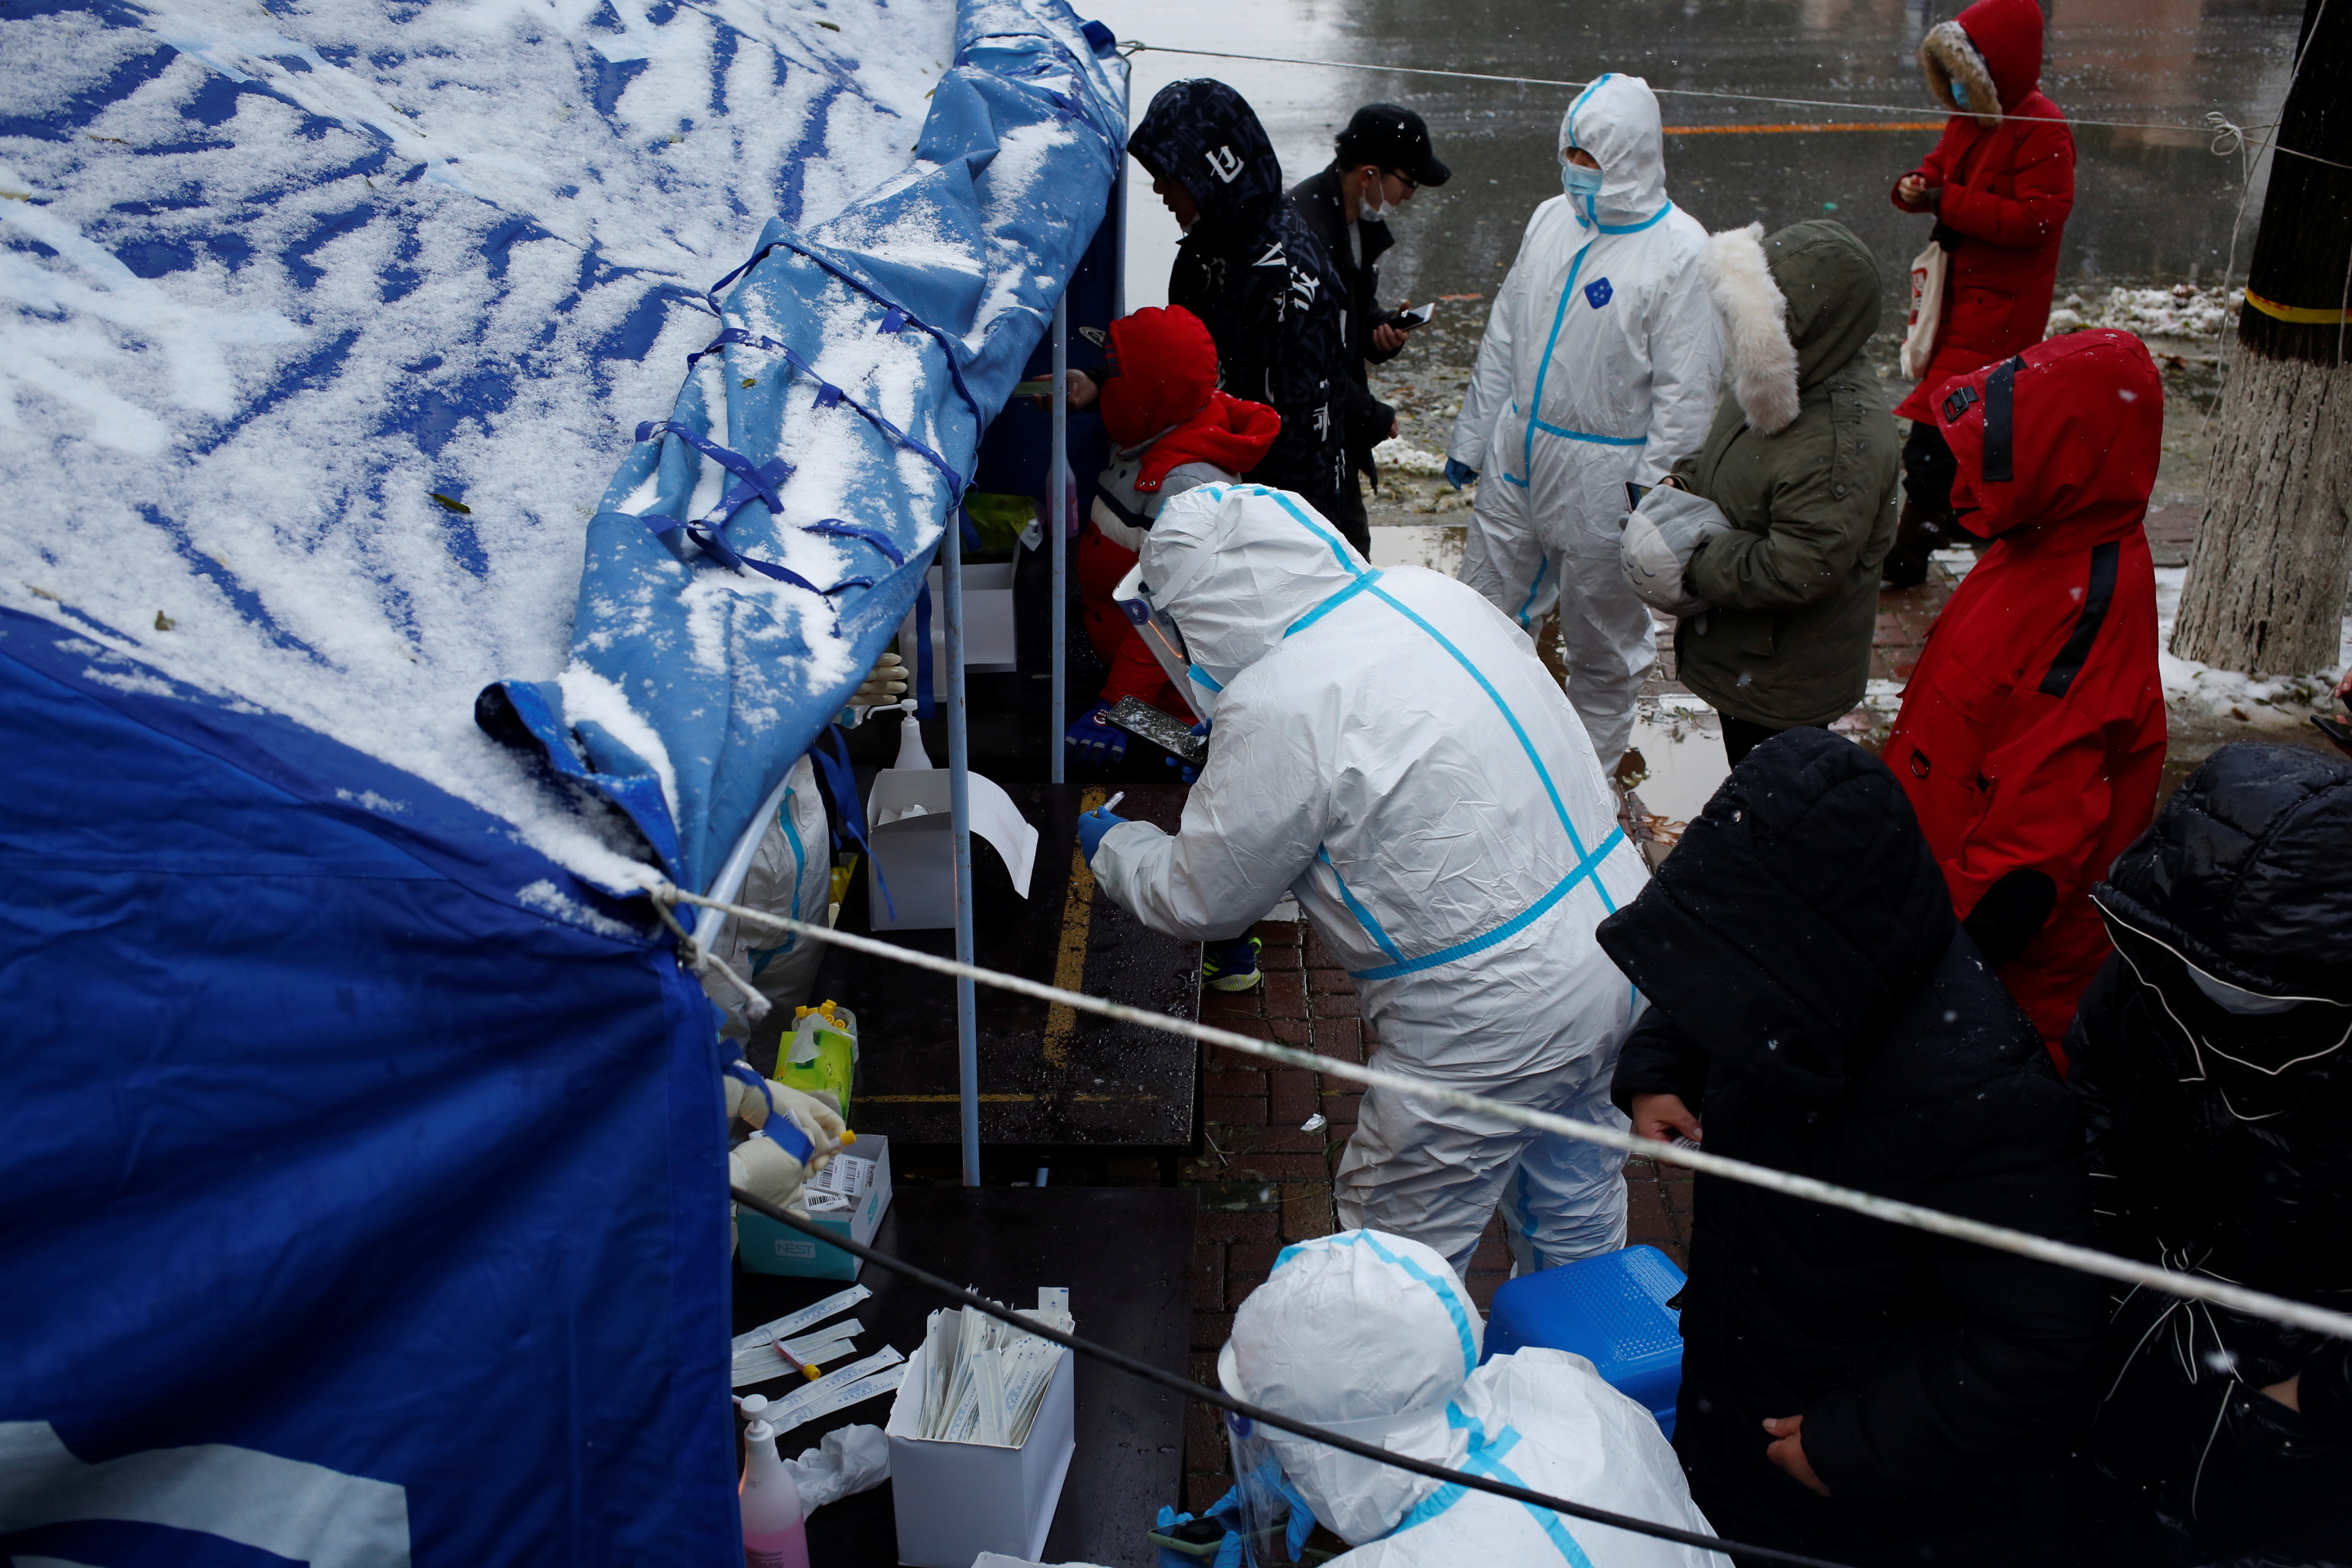 People line up for nucleic acid testing in the snow in Dalian